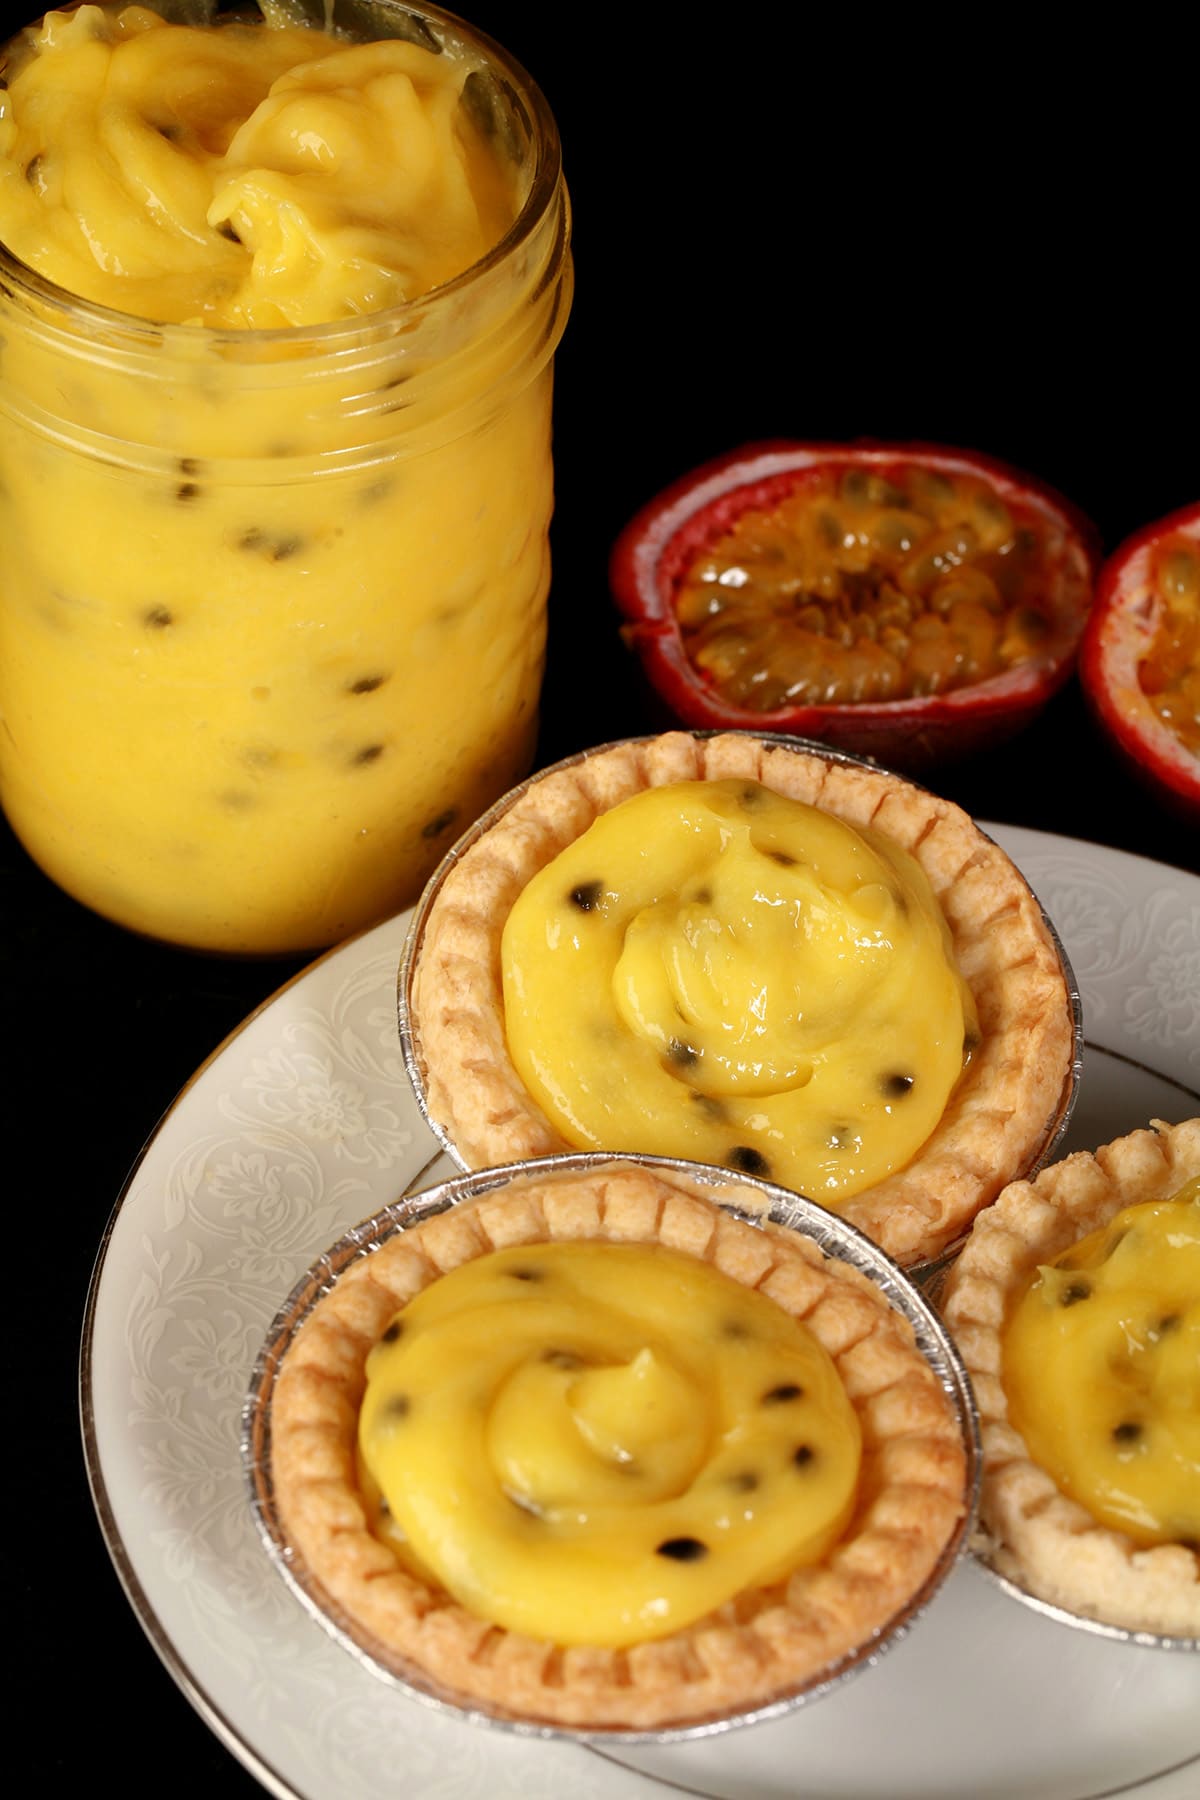 3 passionfruit tarts on a plate. There is a jar of passionfruit curd next to the plate, along with a halved passionfruit.